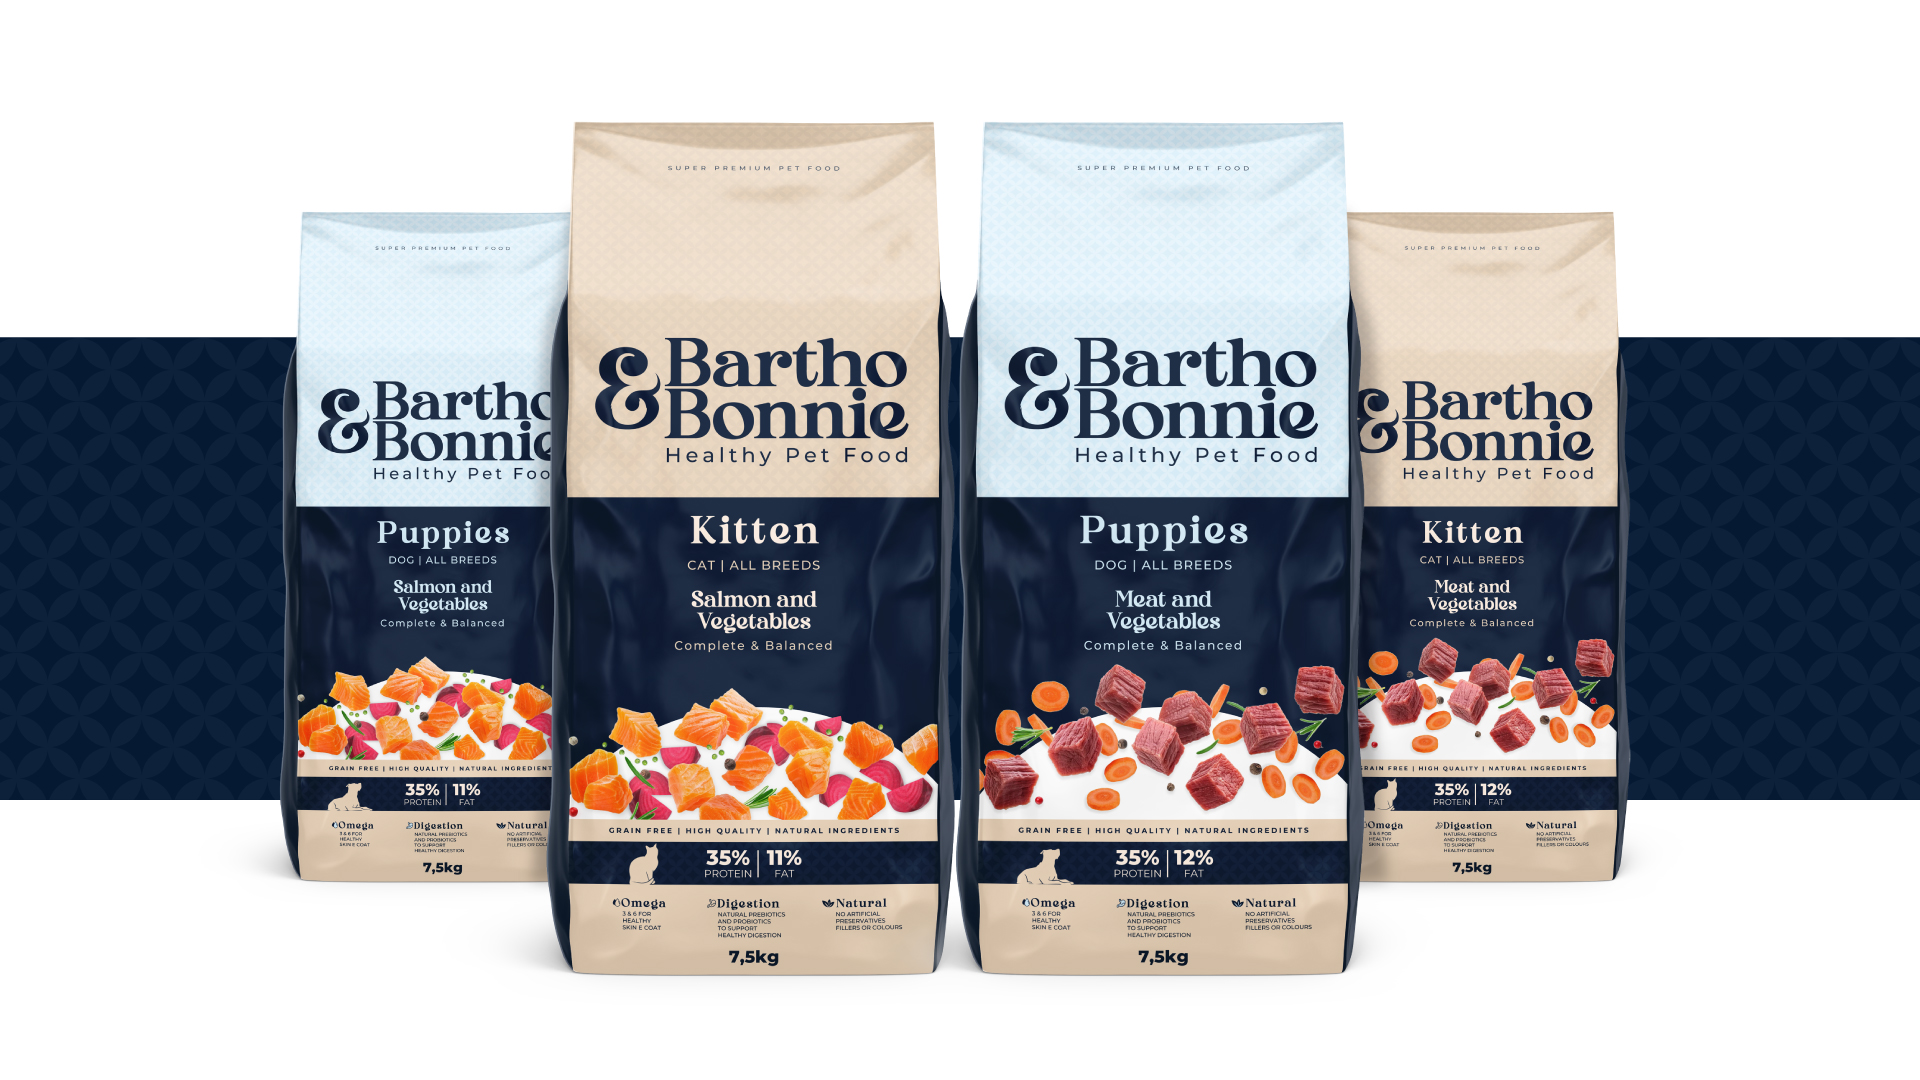 Bartho & Bonnie Branding and Packaging Design By Agência BUD